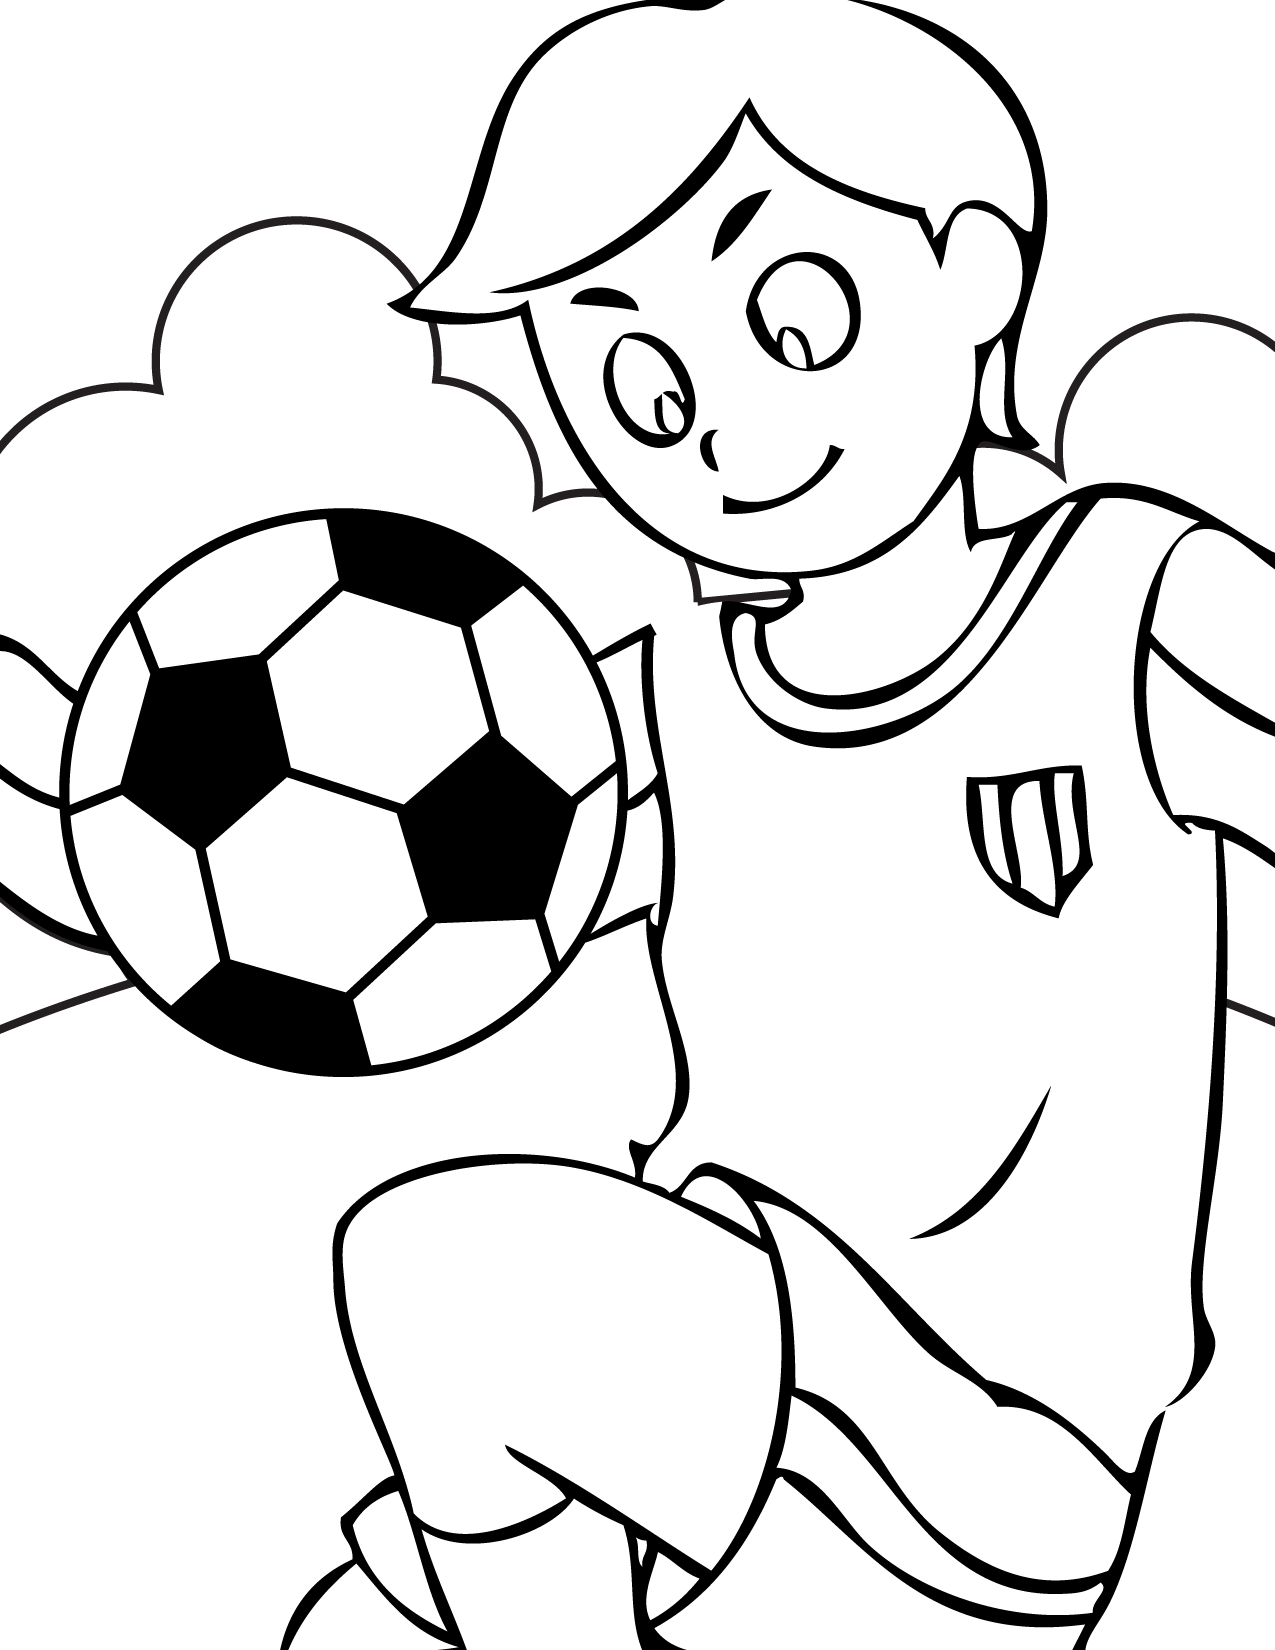 7600 Top Preschool Coloring Pages Soccer Ball For Free